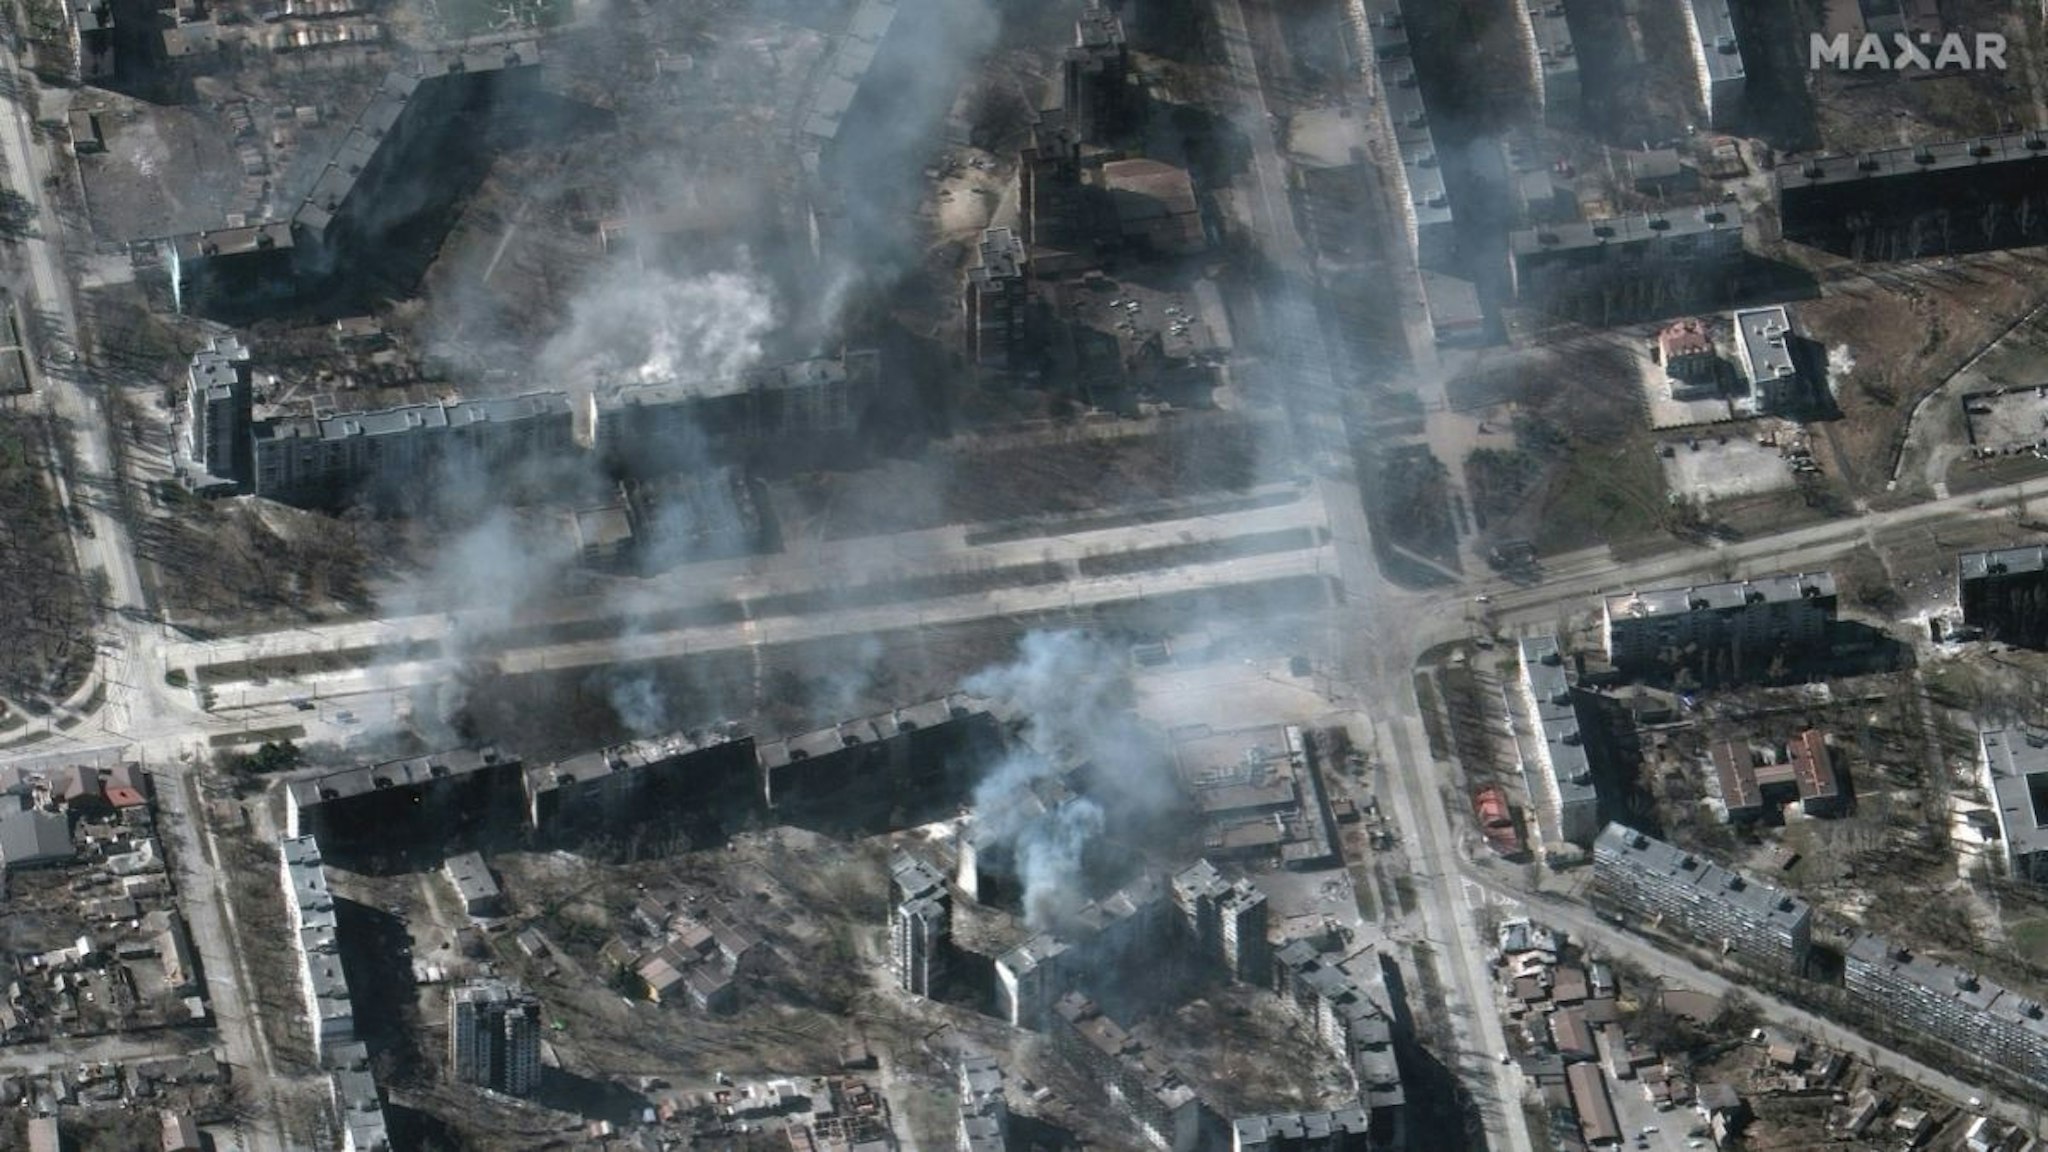 Maxar satellite imagery of additional burning residential apartment buildings in Mariupol, Ukraine.